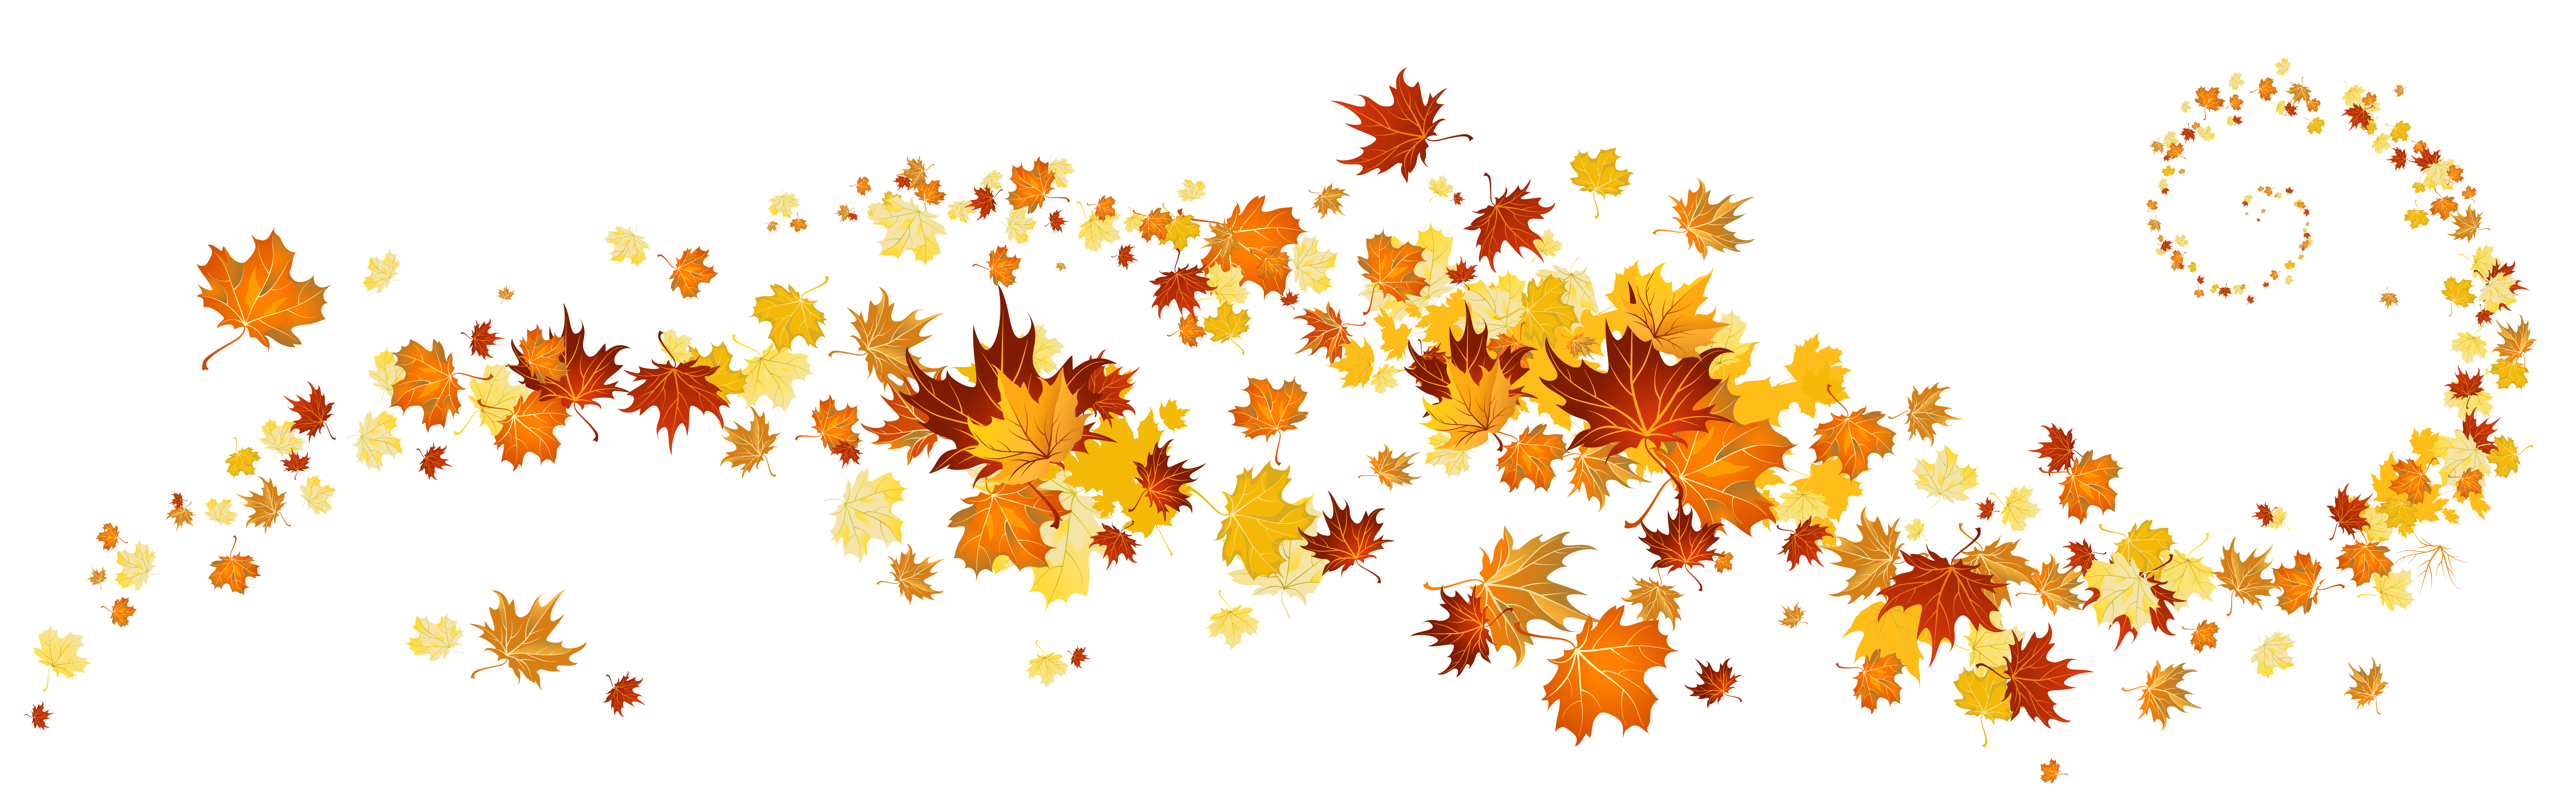 Fall Pictures Clip Art. 